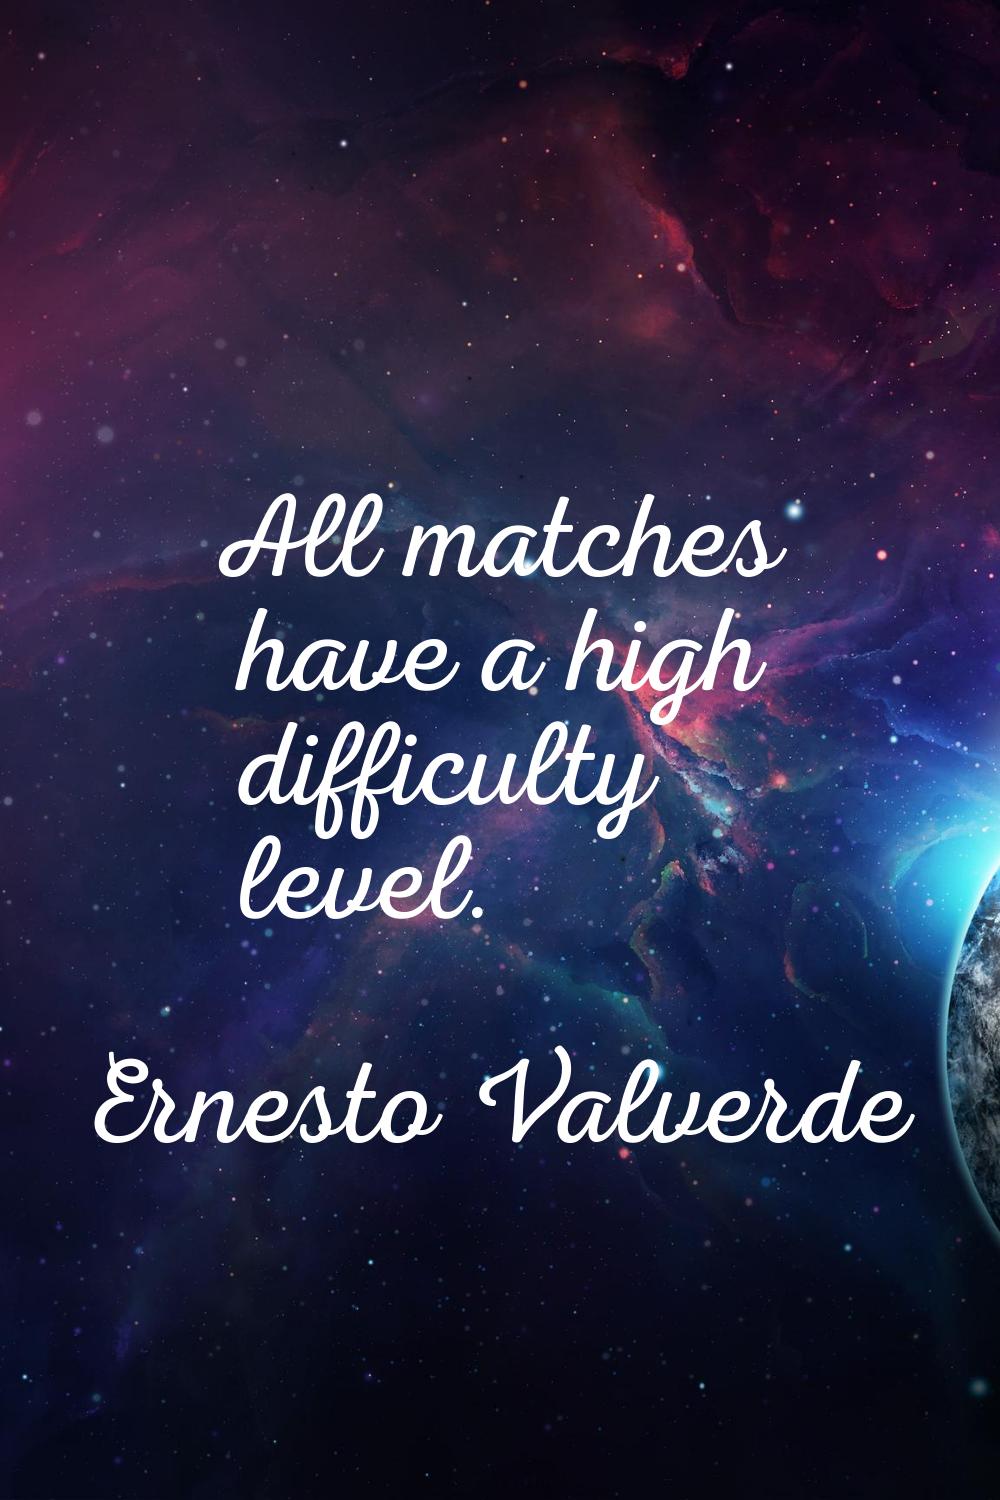 All matches have a high difficulty level.